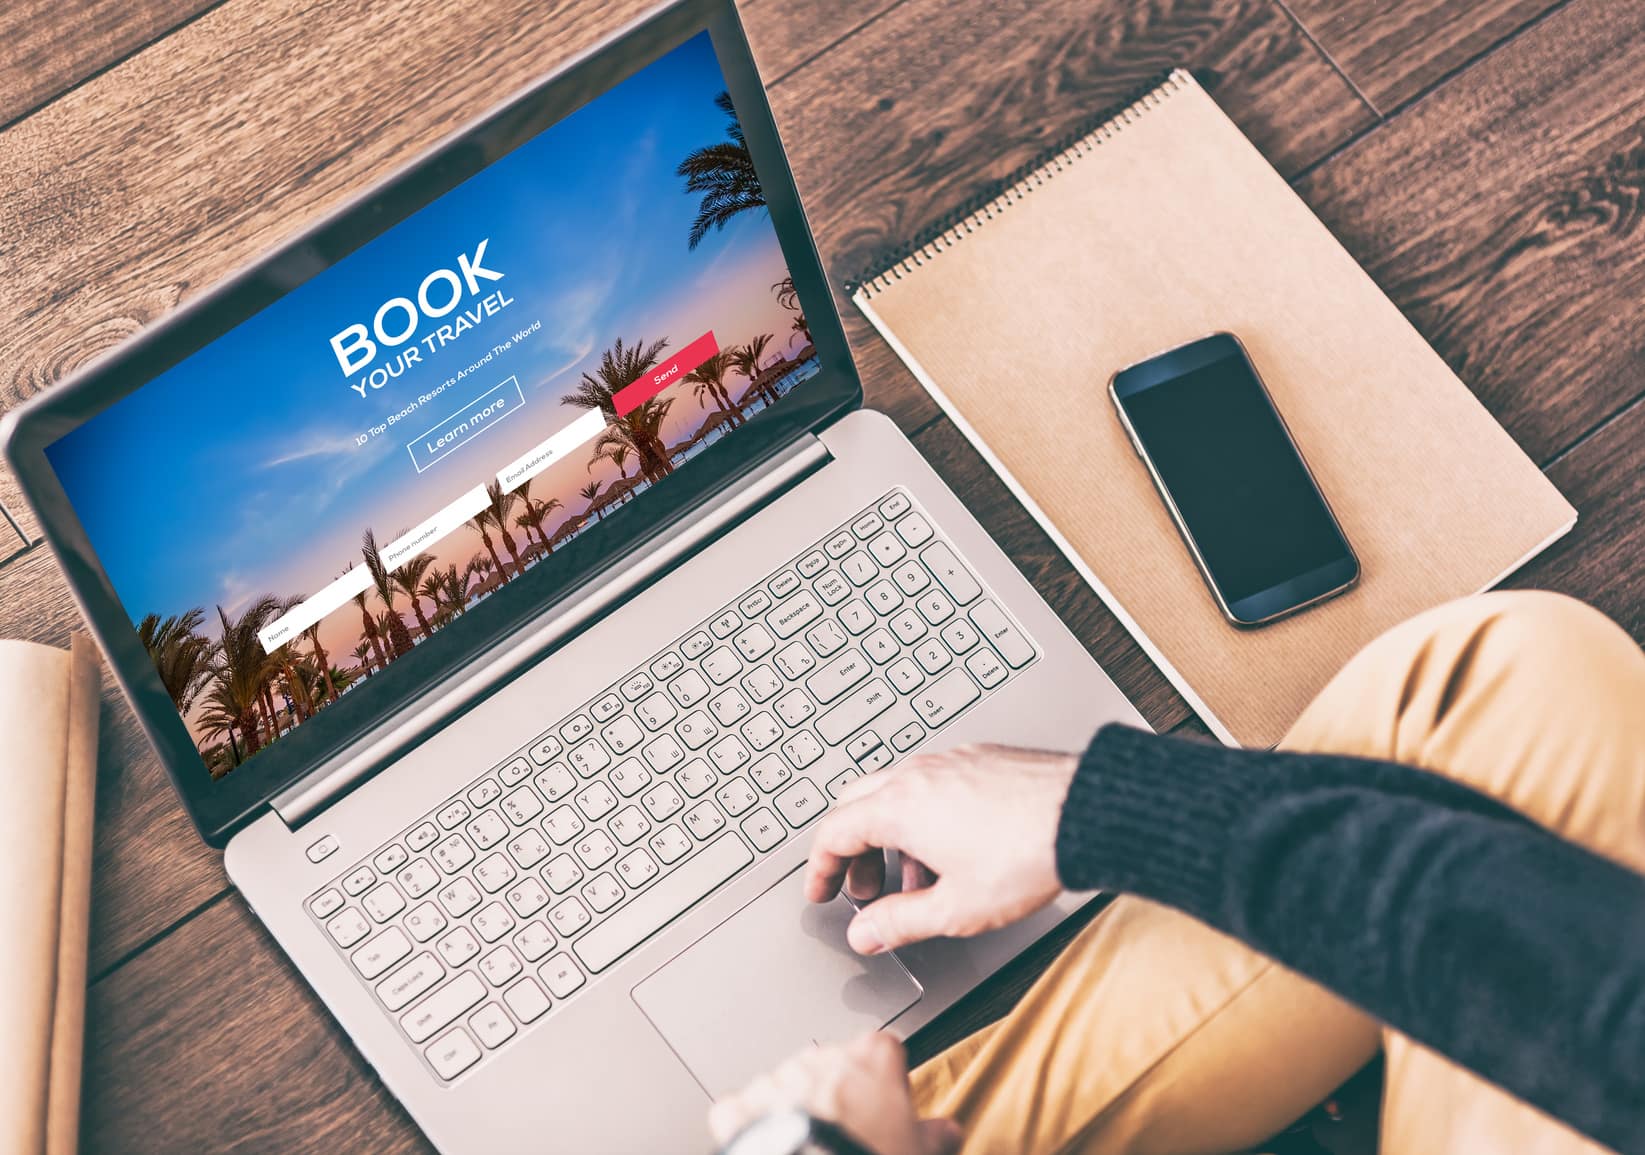 What are the benefits of direct online hotel booking?